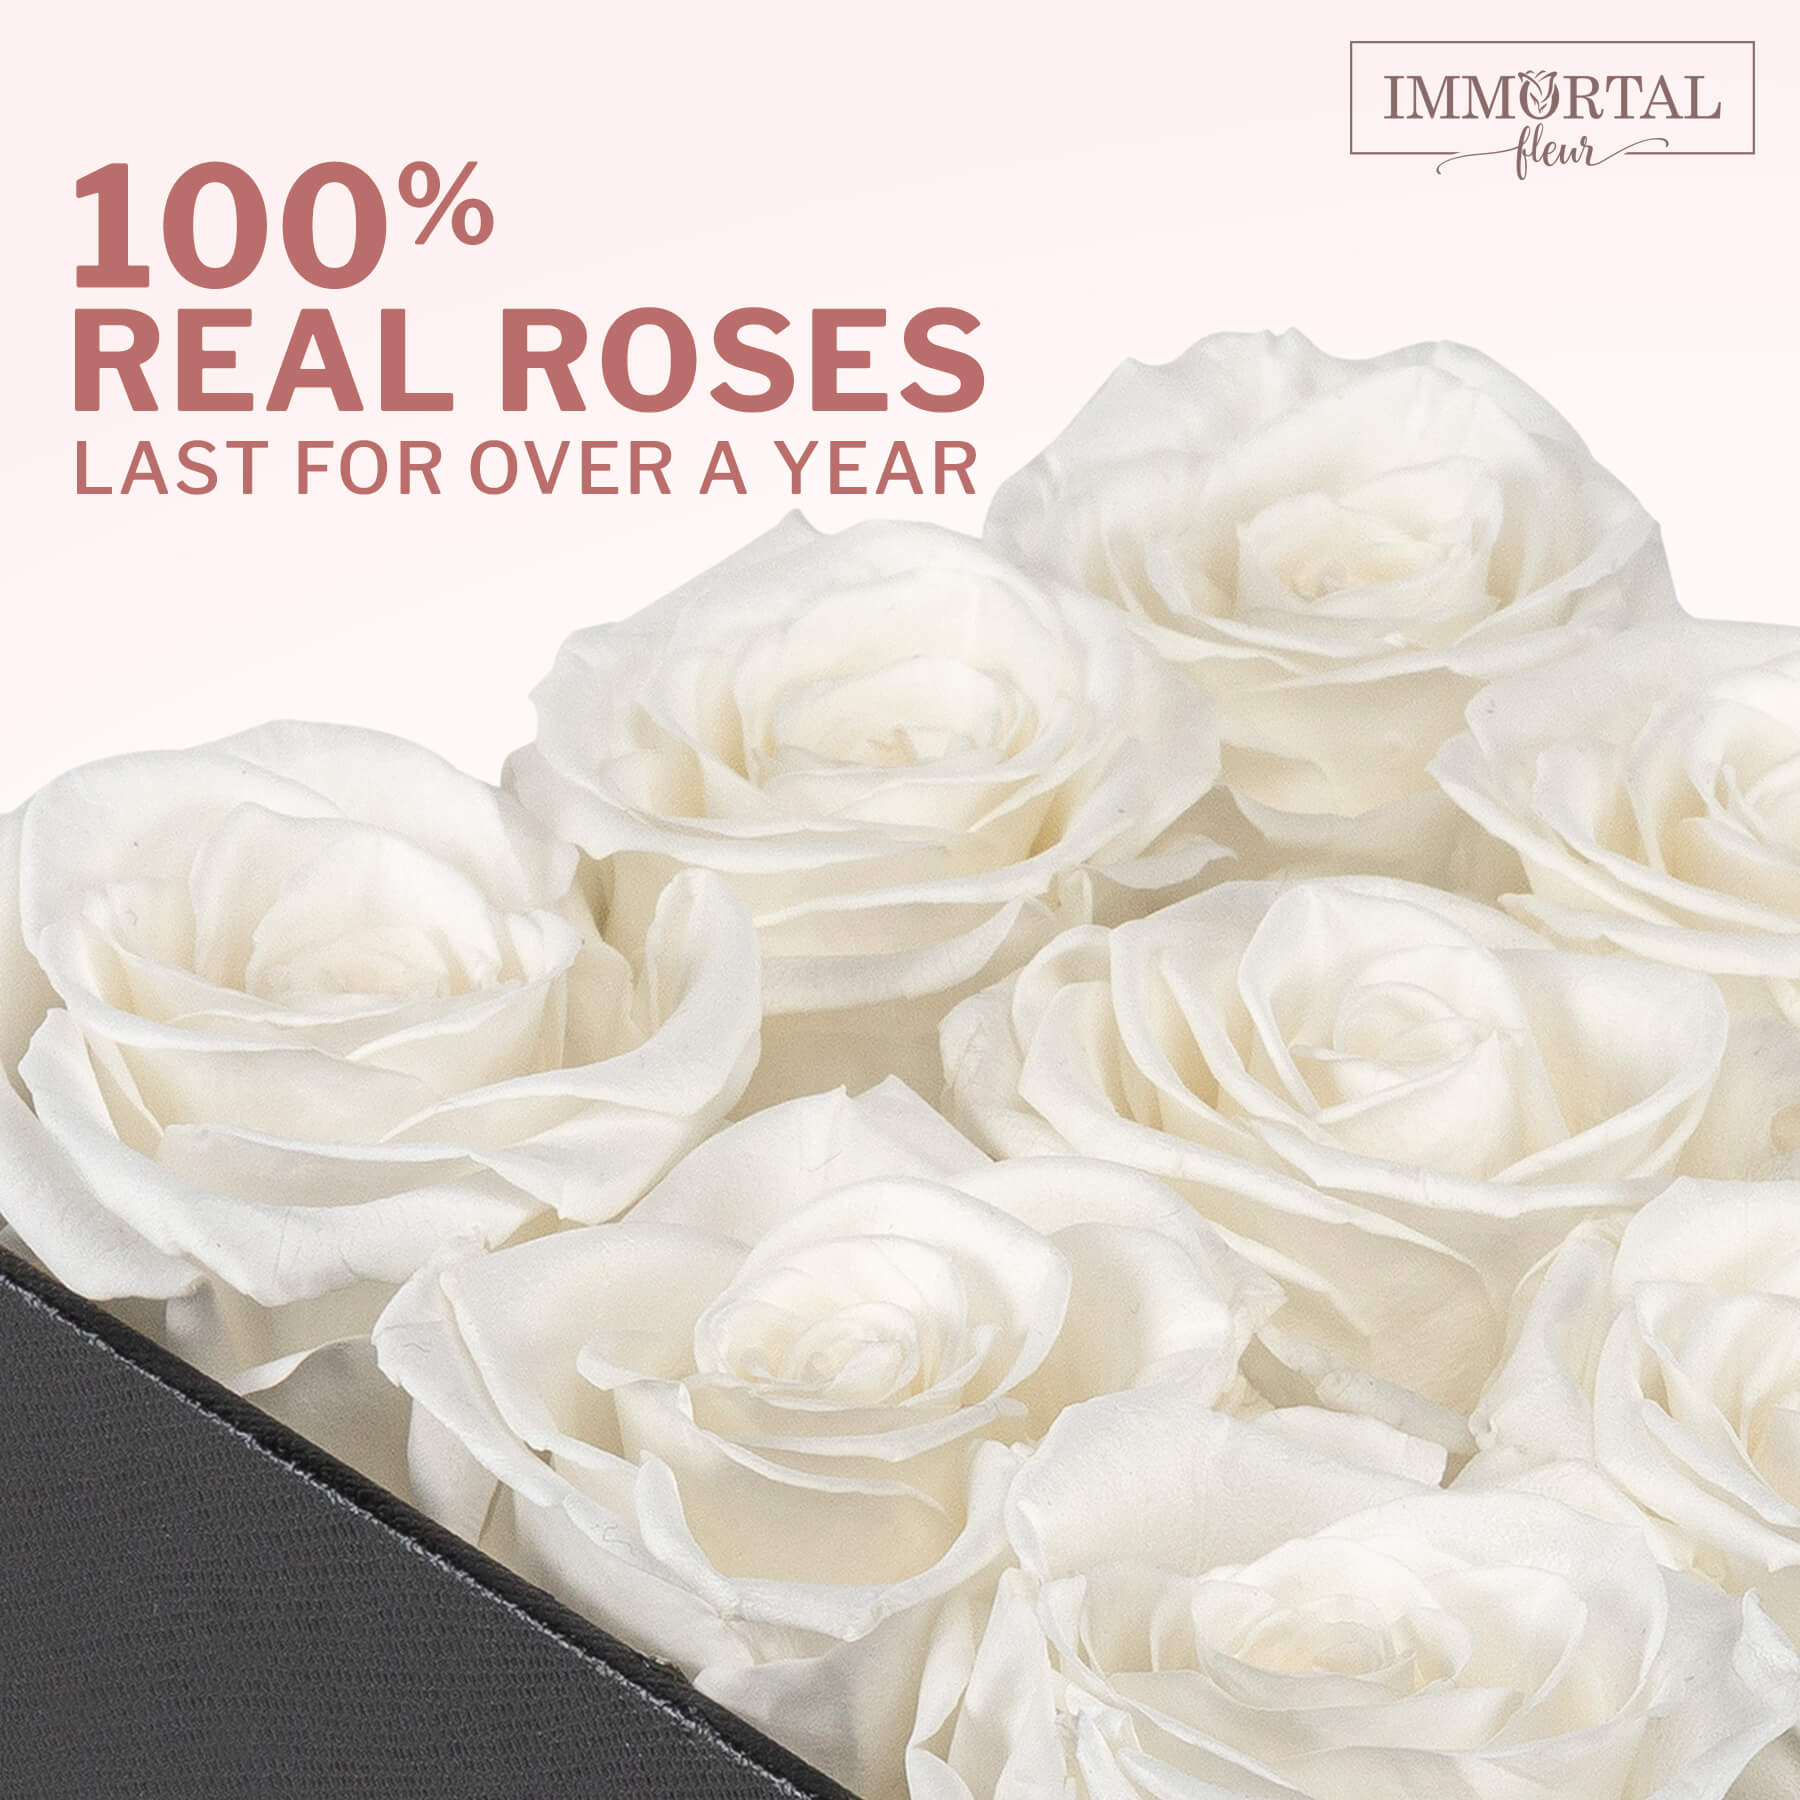 7 White Natural Preserved Roses - Last Over A Year